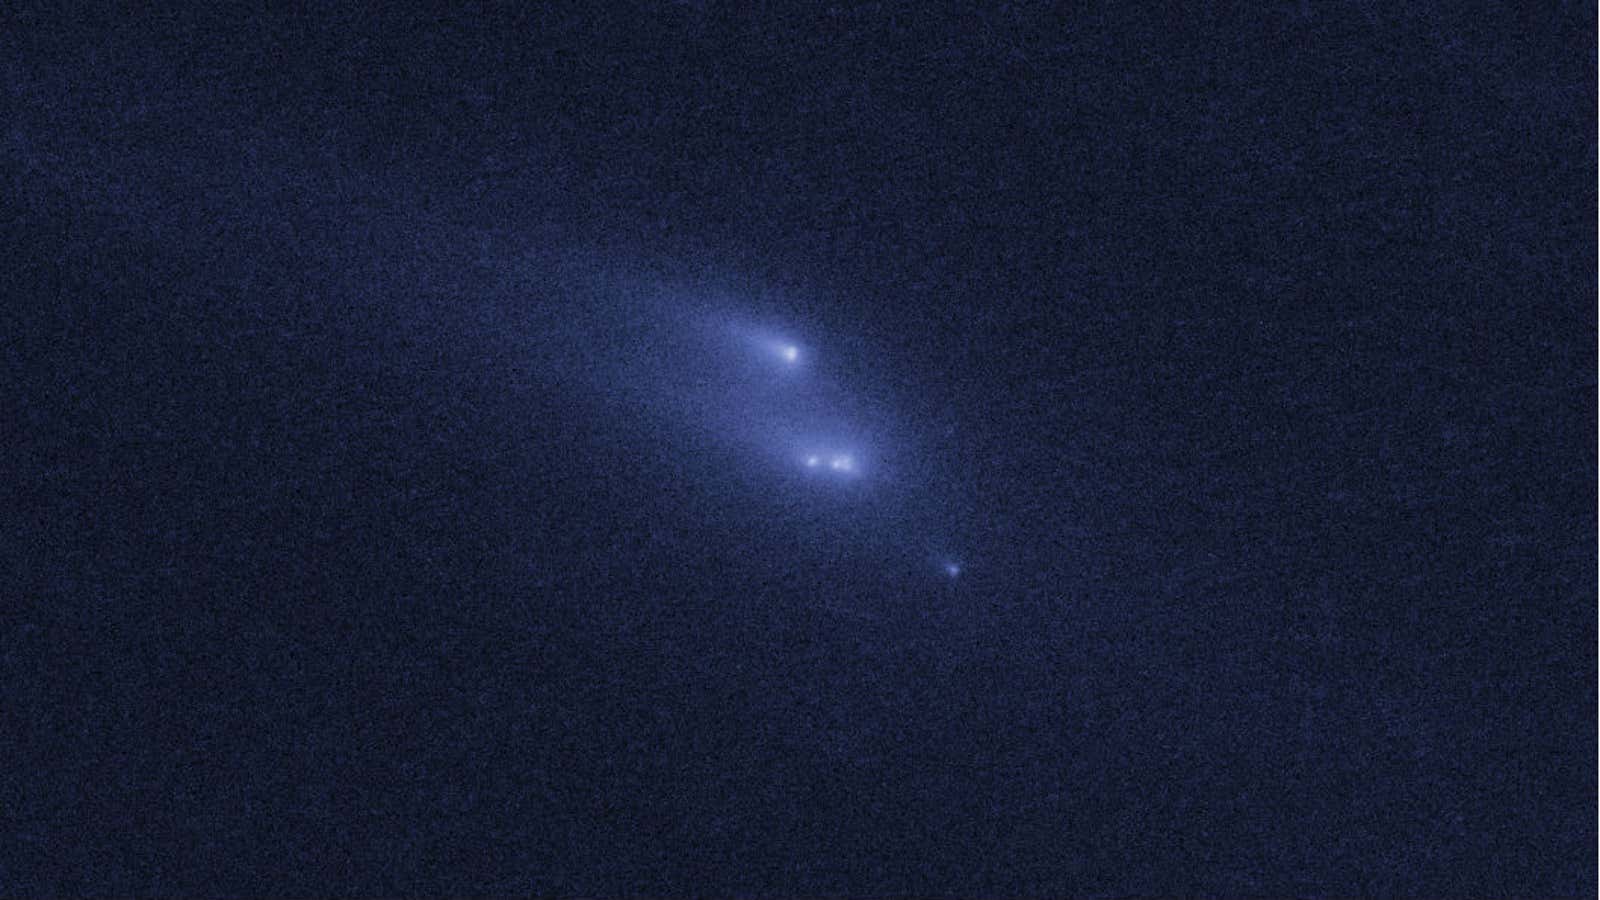 An asteroid similar to this one spotted by the Hubble telescope will fly by closer to Earth than the moon Friday morning.